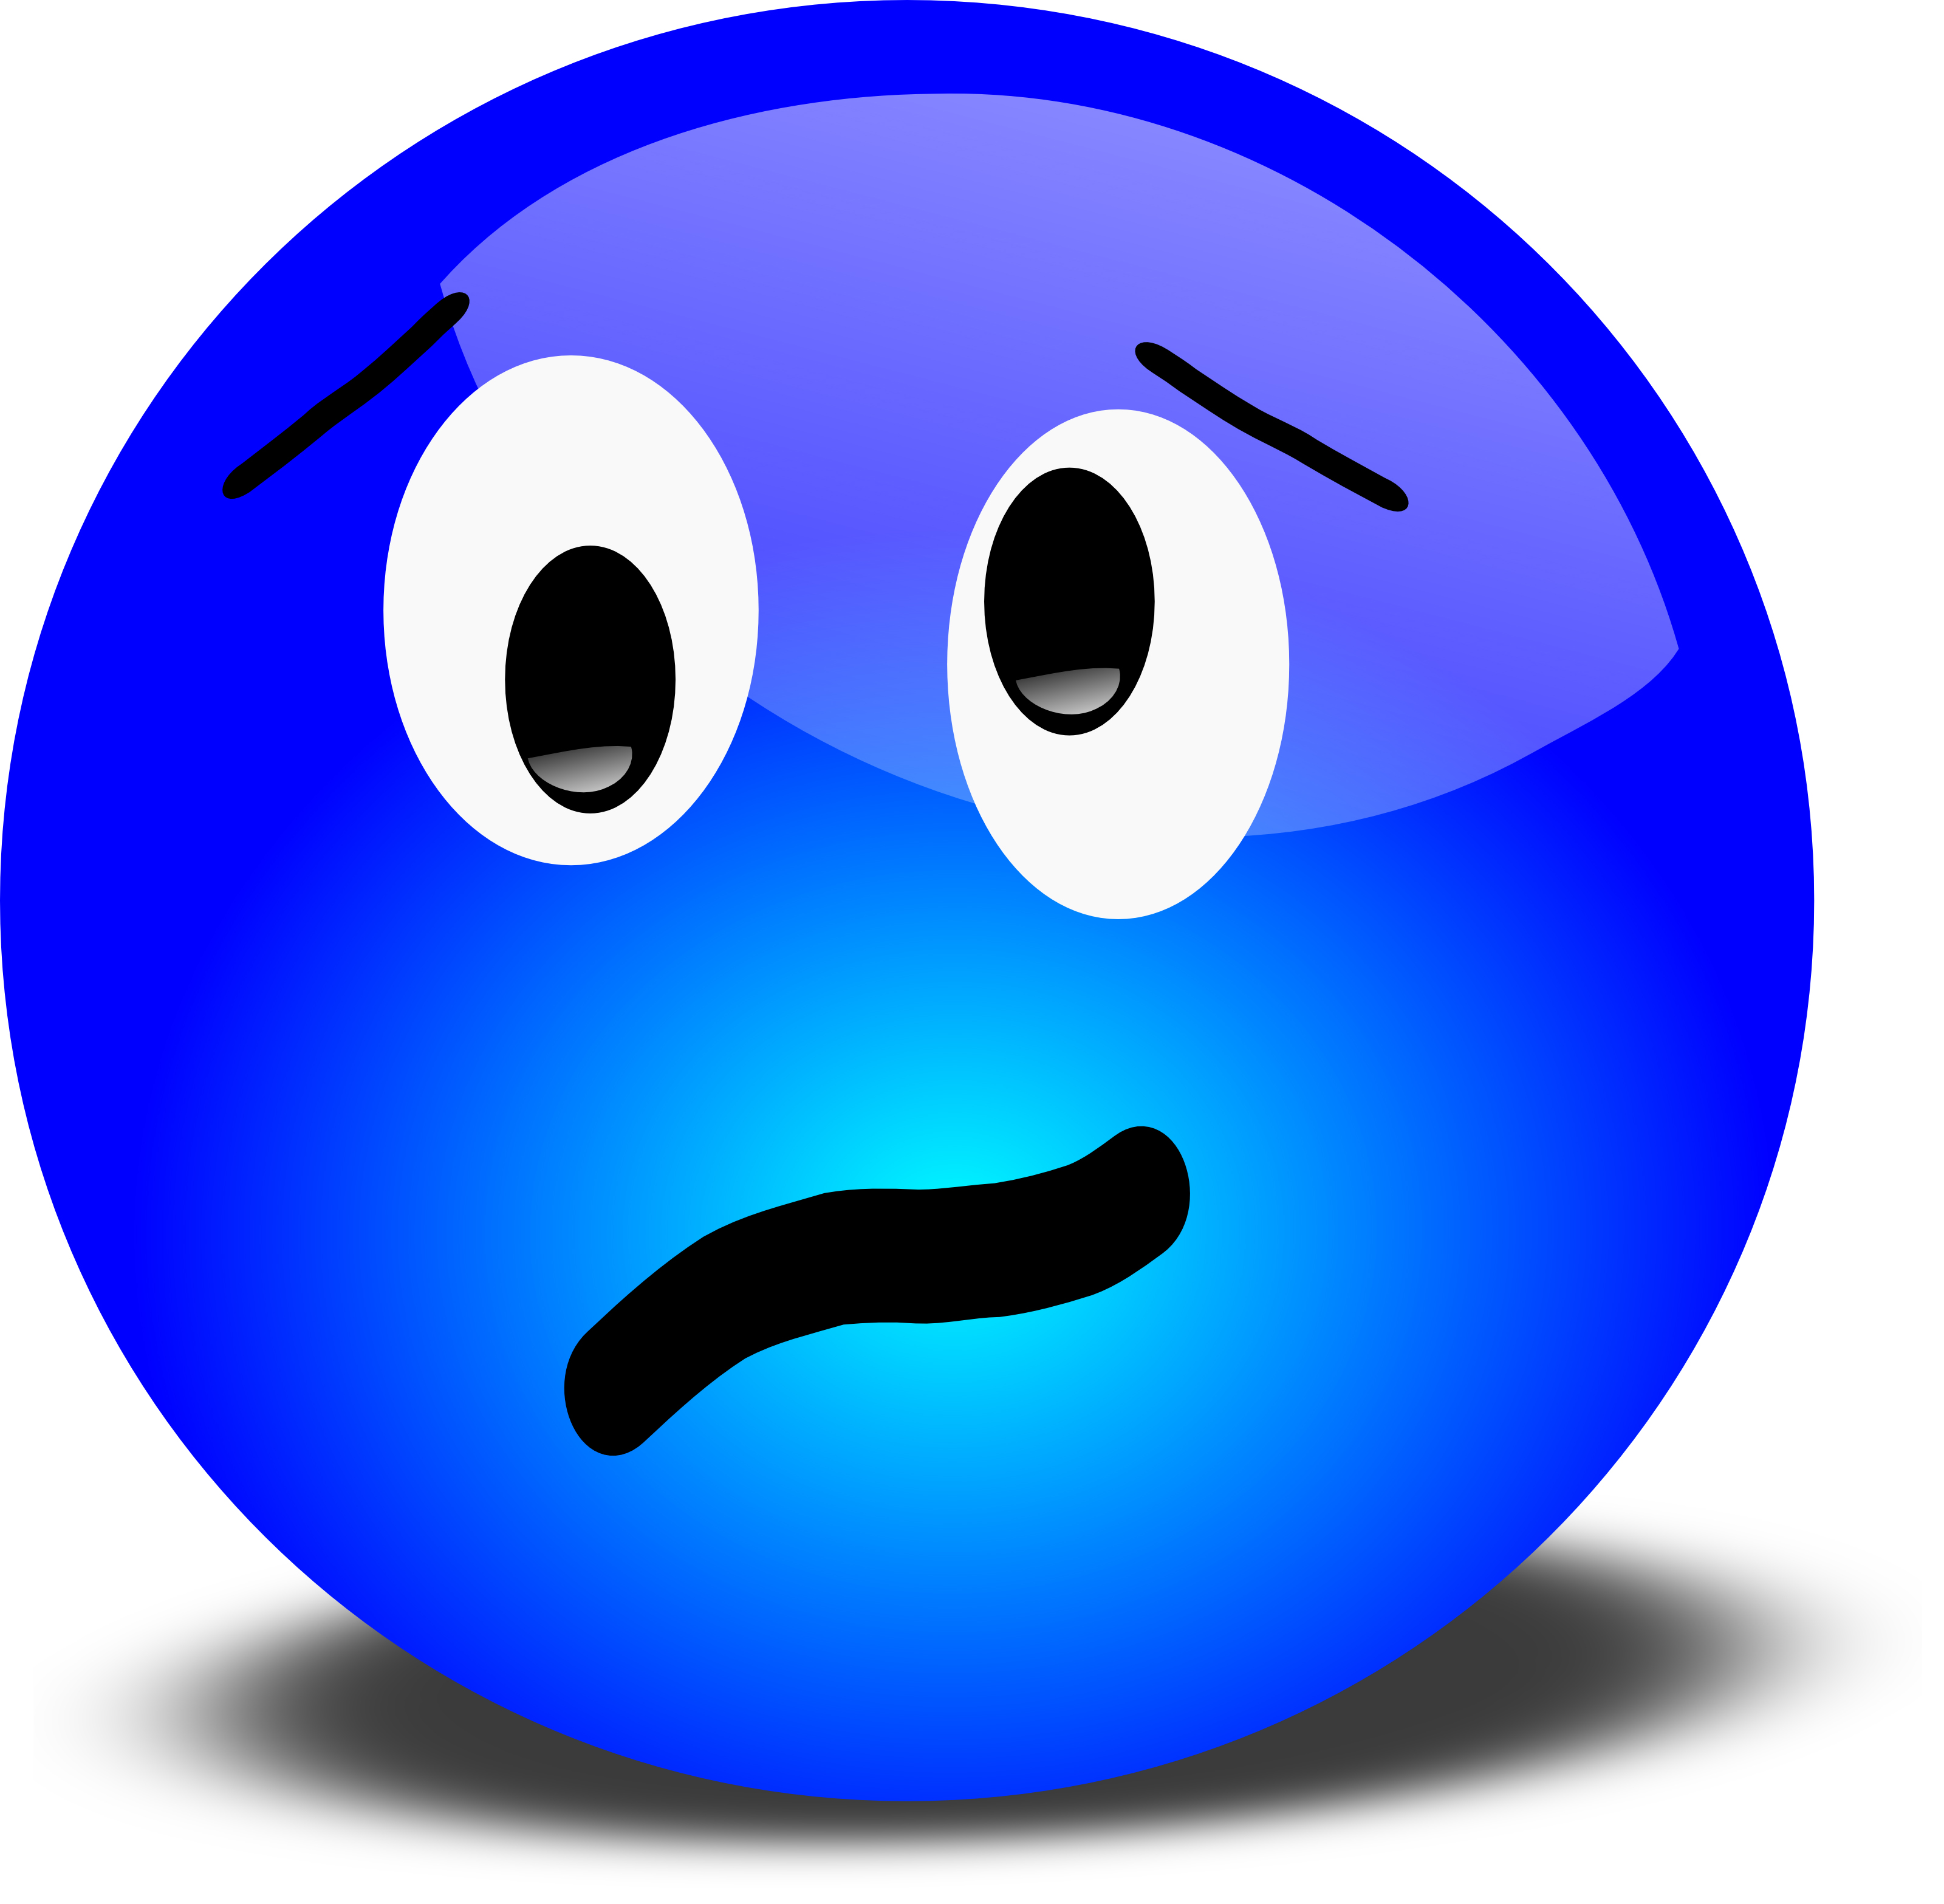 Smiley Face Happy And Sad Face Images Clipart